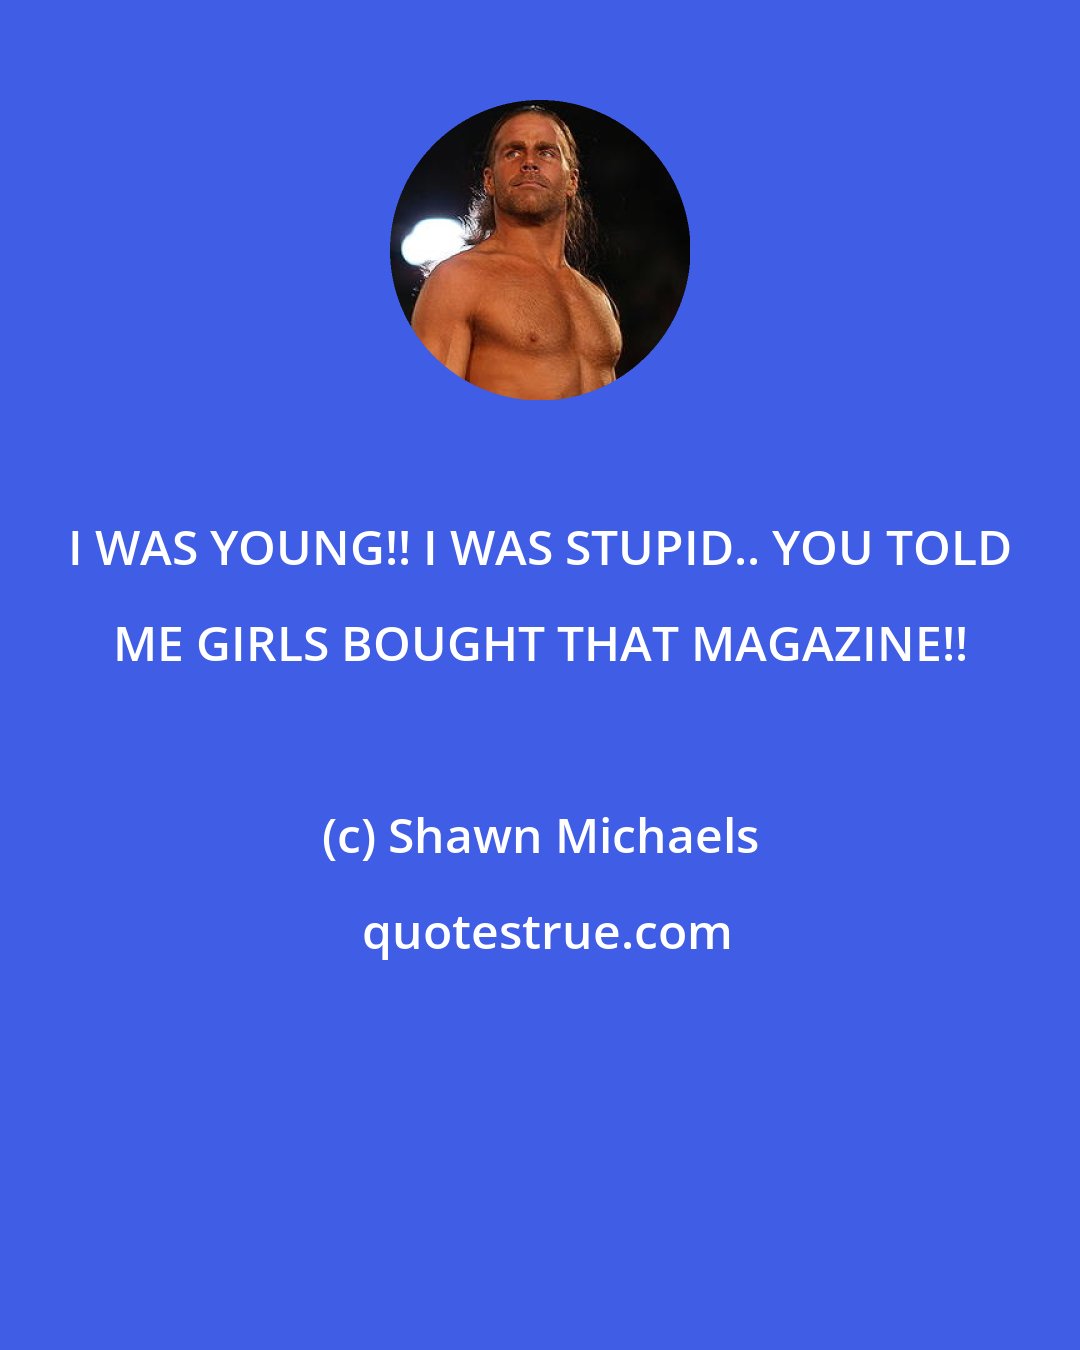 Shawn Michaels: I WAS YOUNG!! I WAS STUPID.. YOU TOLD ME GIRLS BOUGHT THAT MAGAZINE!!